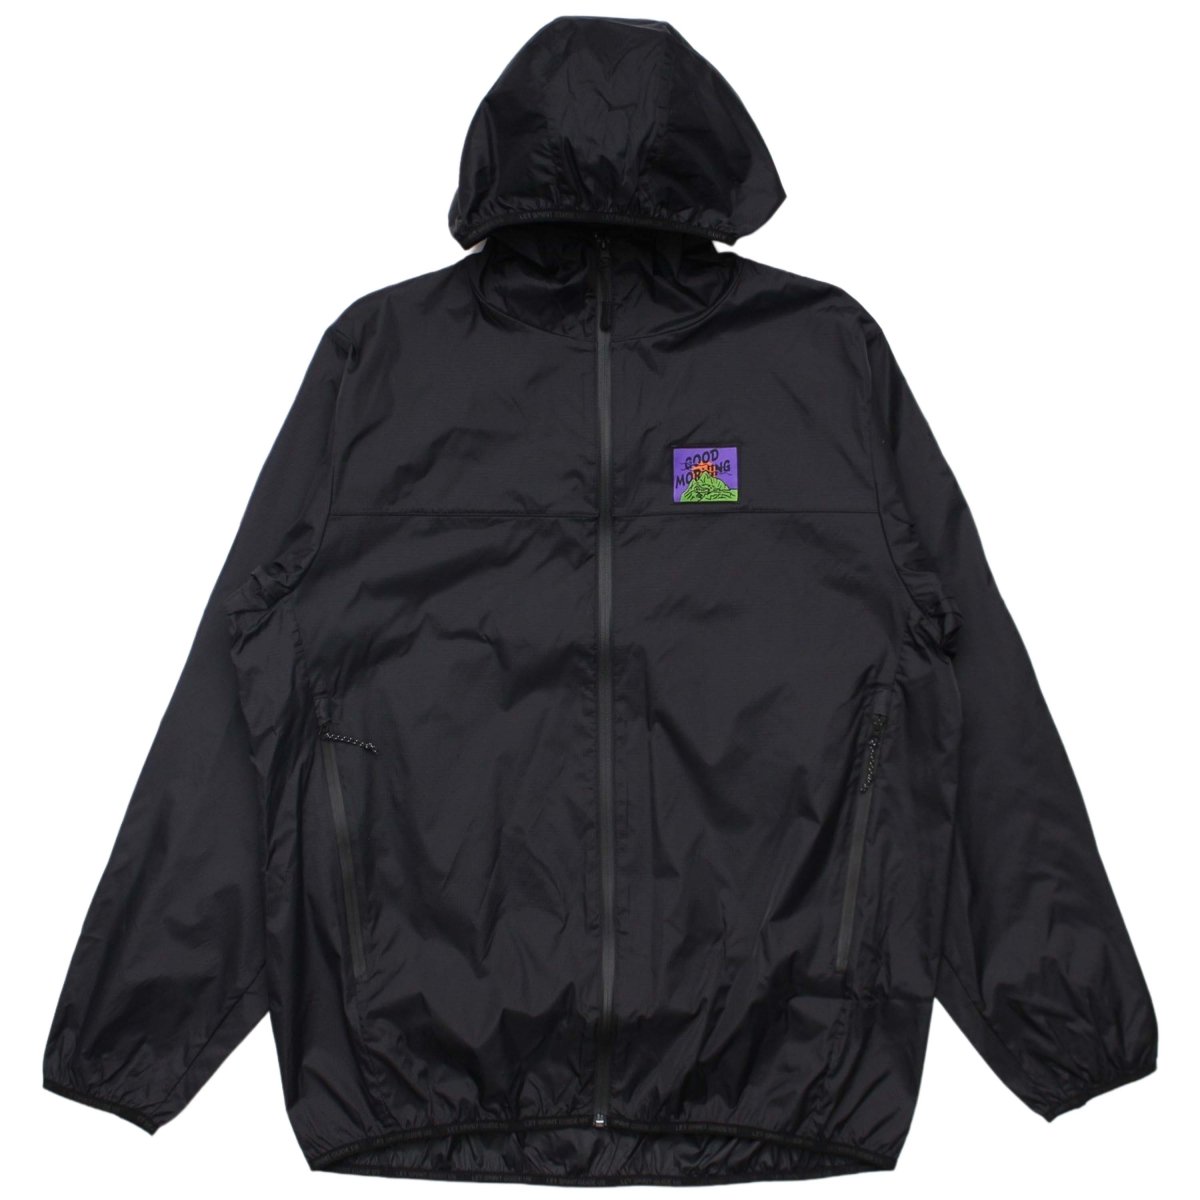 GMT RECYCLED RIPSTOP SPRAY JACKET